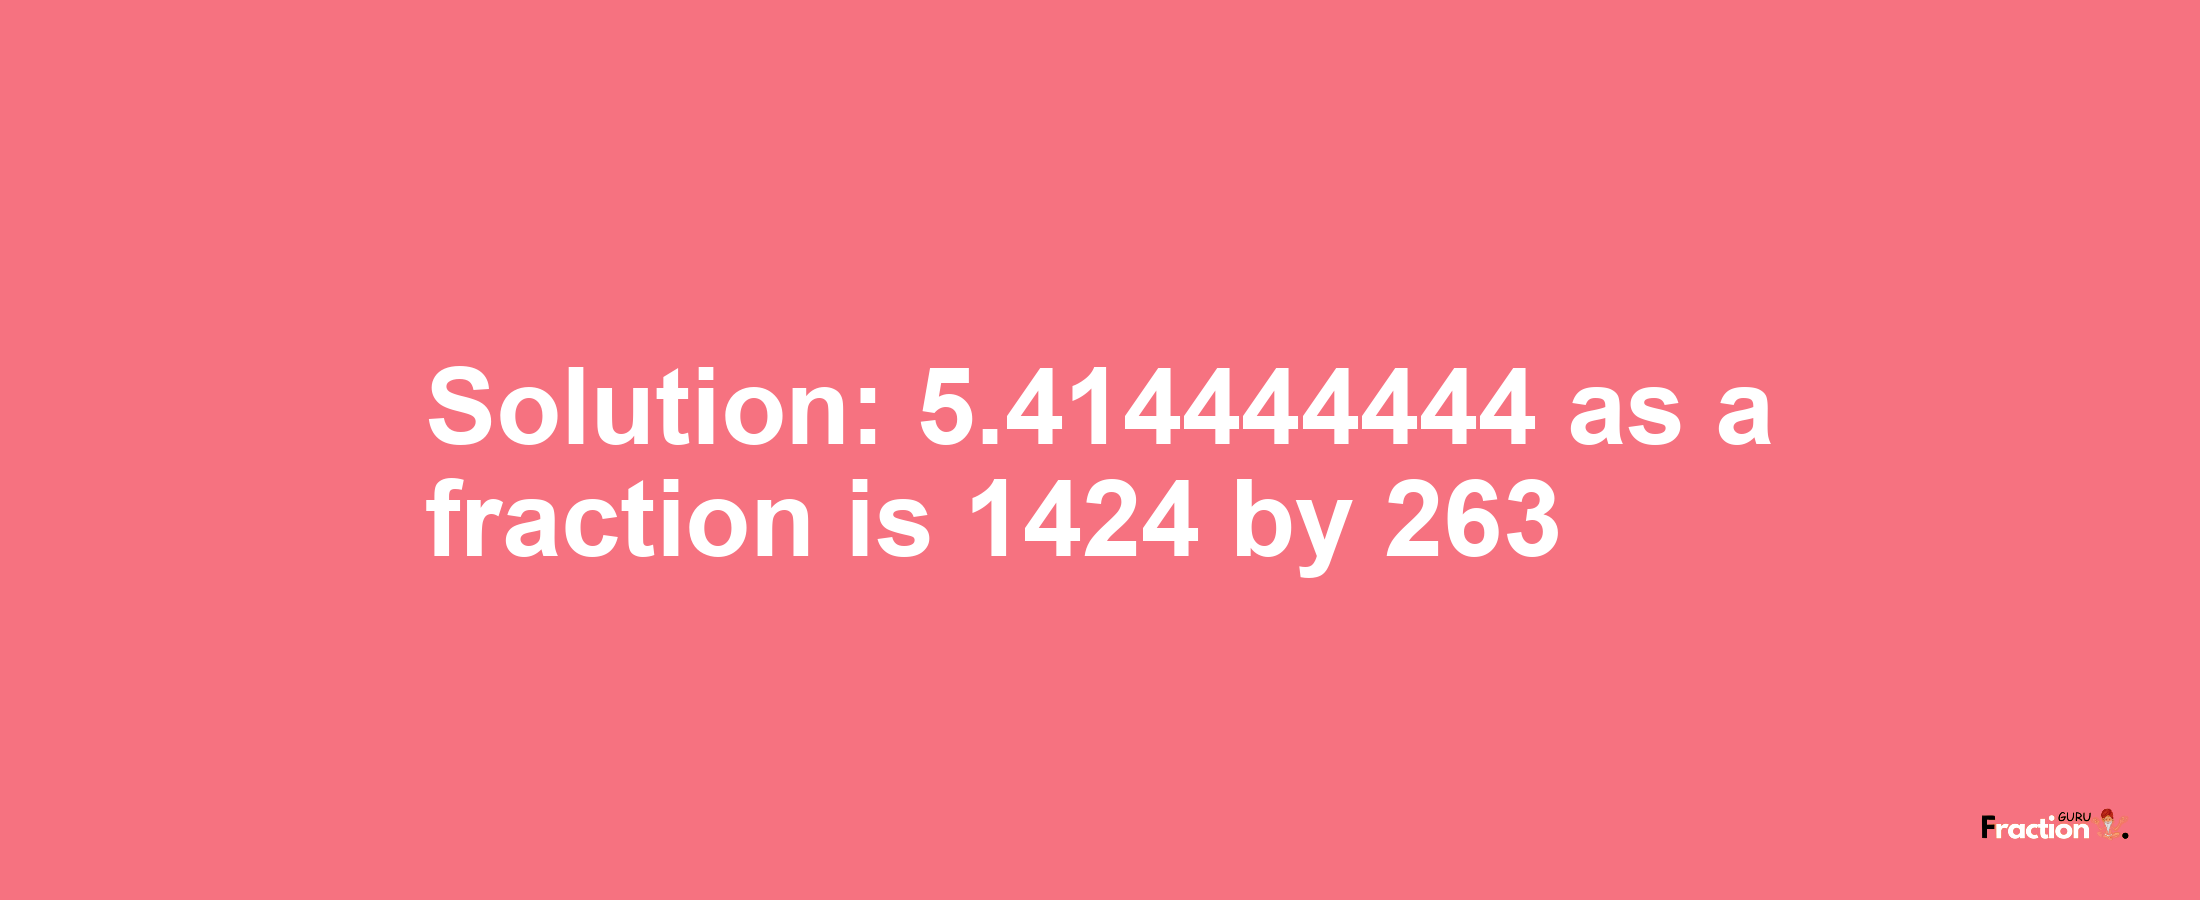 Solution:5.414444444 as a fraction is 1424/263